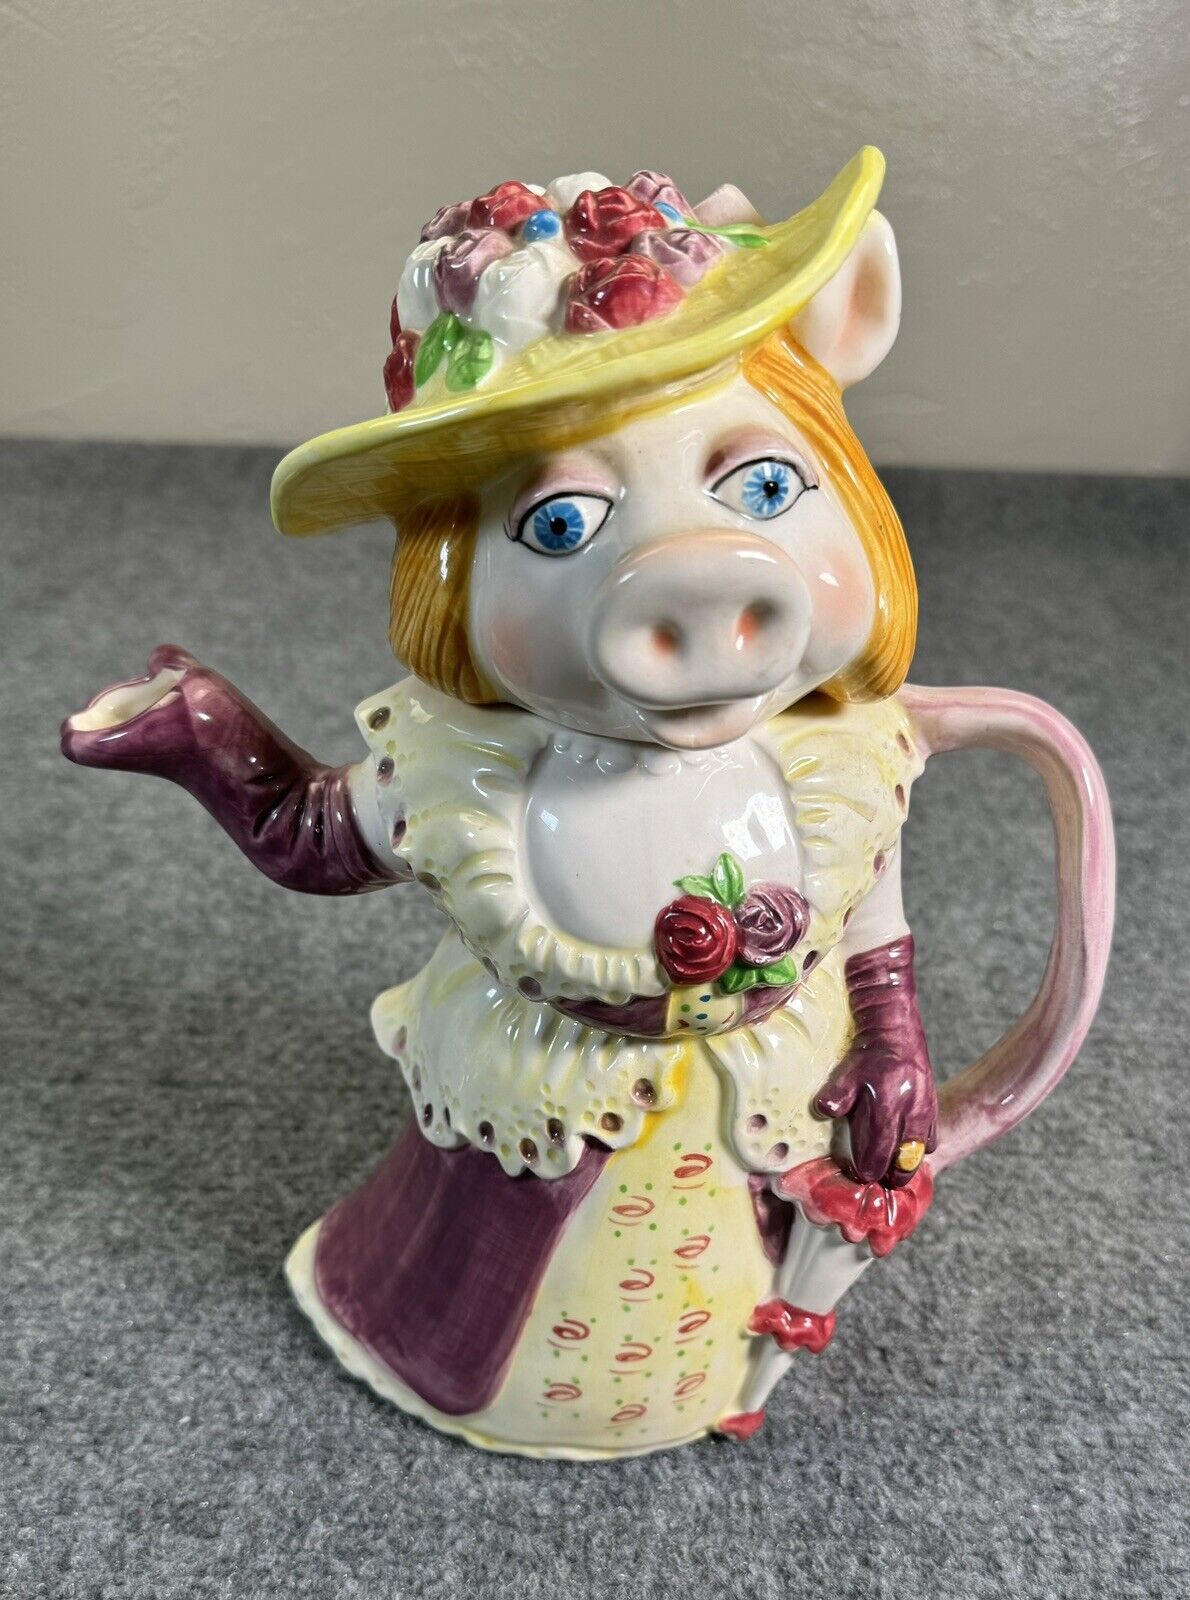 Vintage Miss Piggy Muppets Ceramic Pitcher By Sigma Made In Japan Pitcher